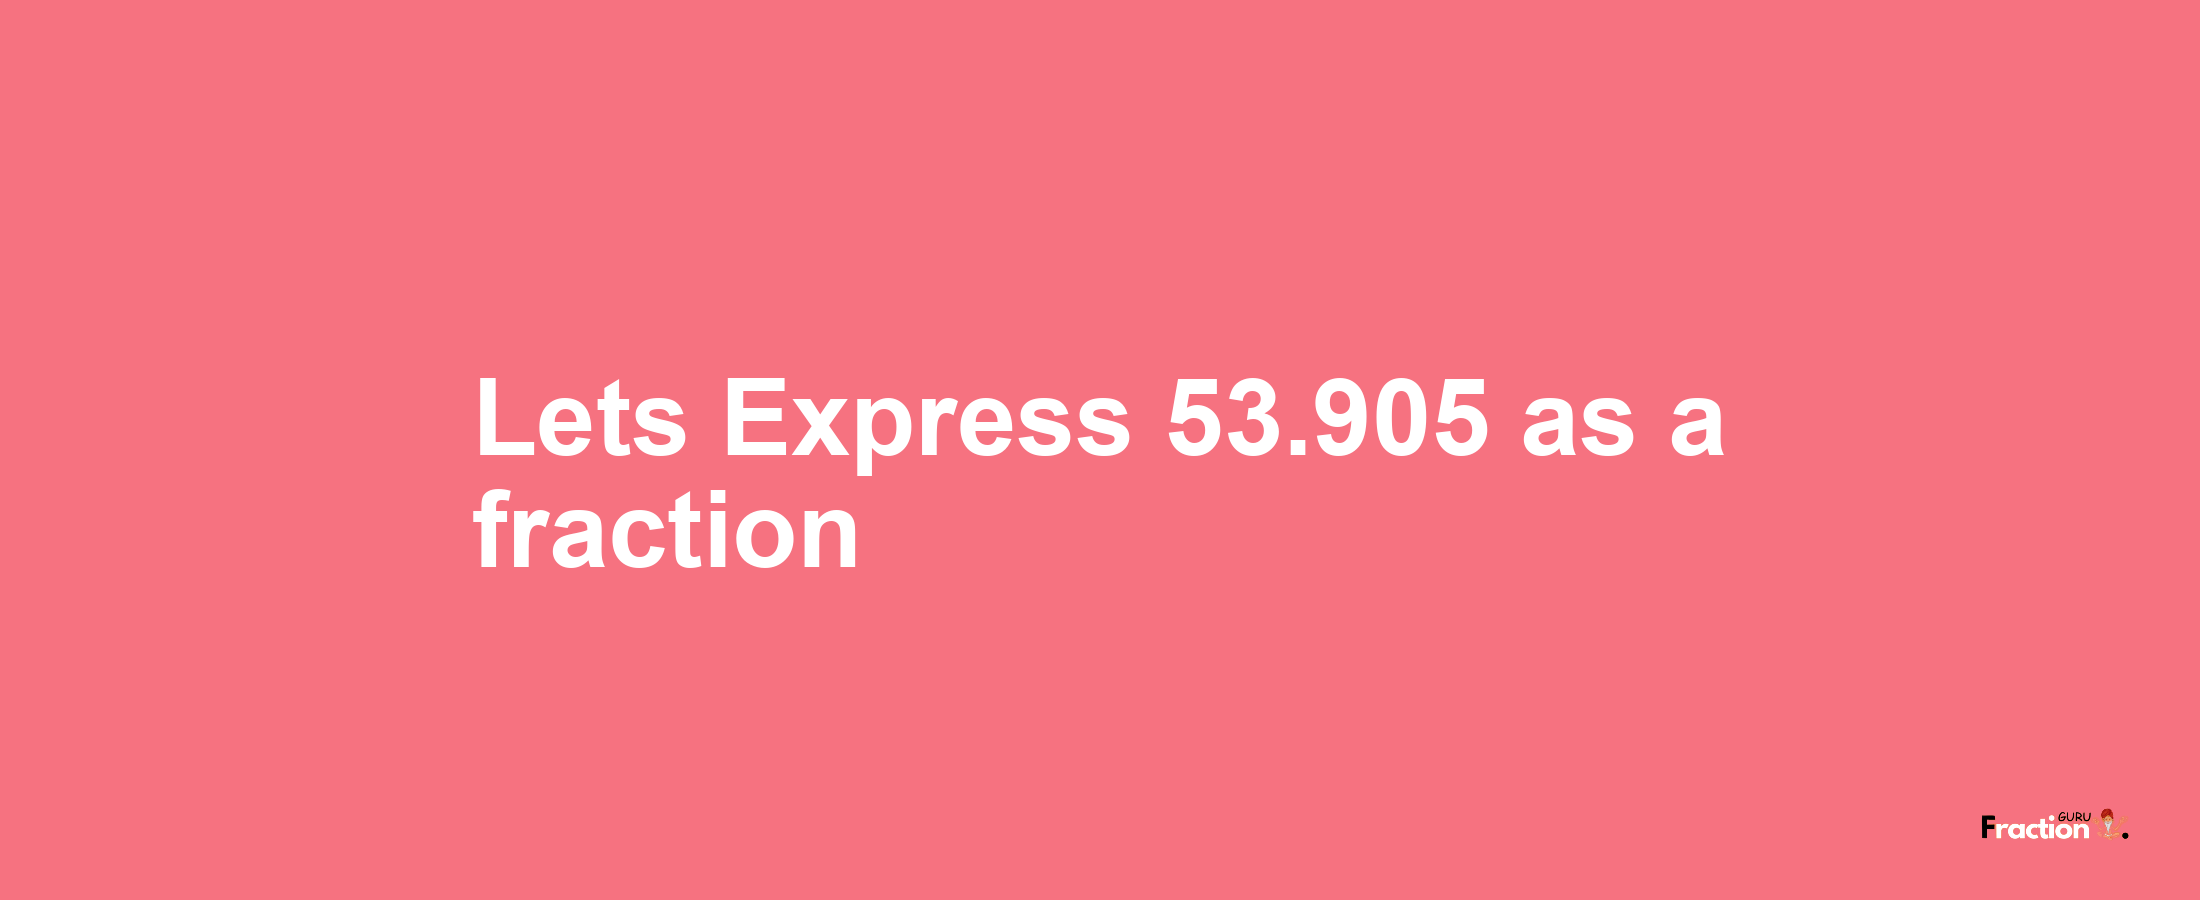 Lets Express 53.905 as afraction